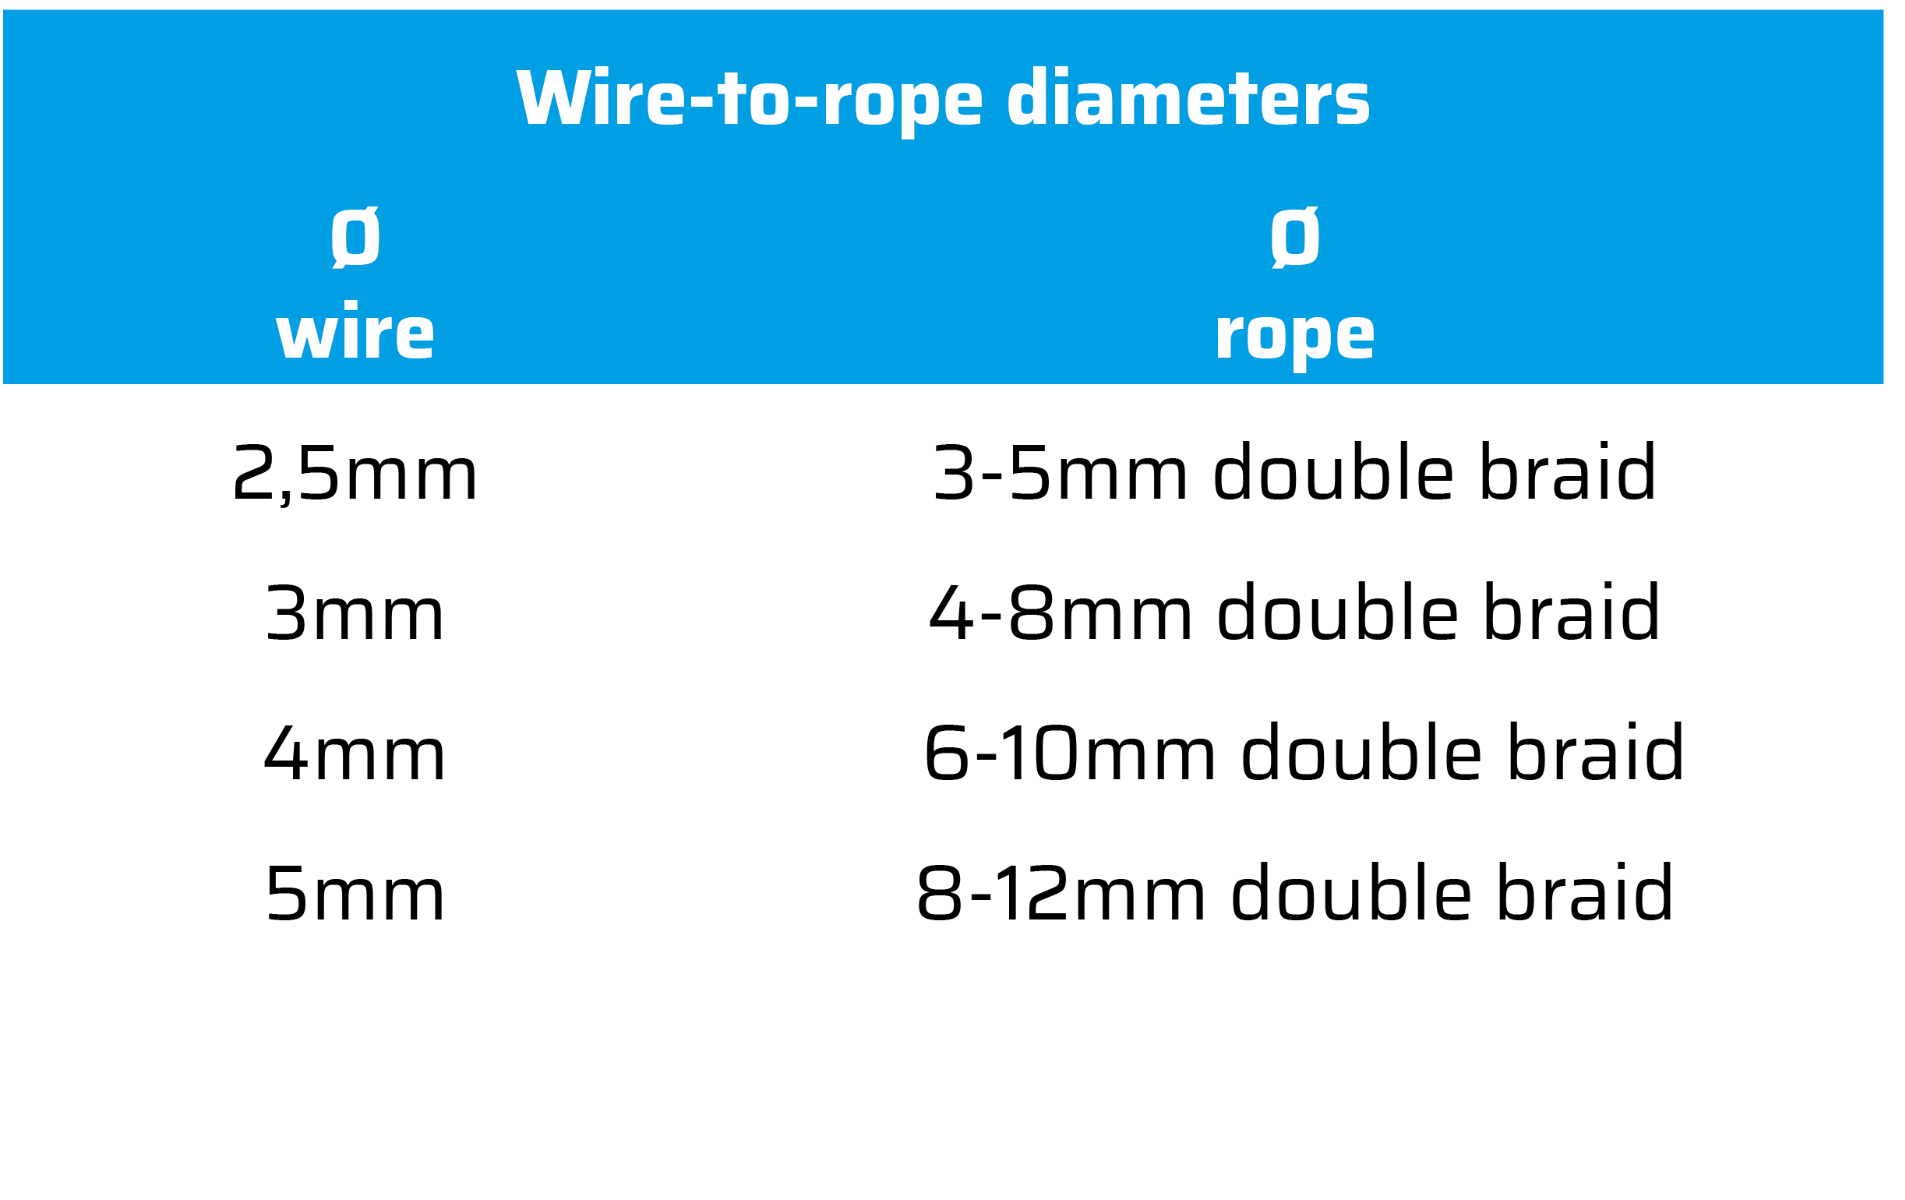 tabel_wire-2-rope